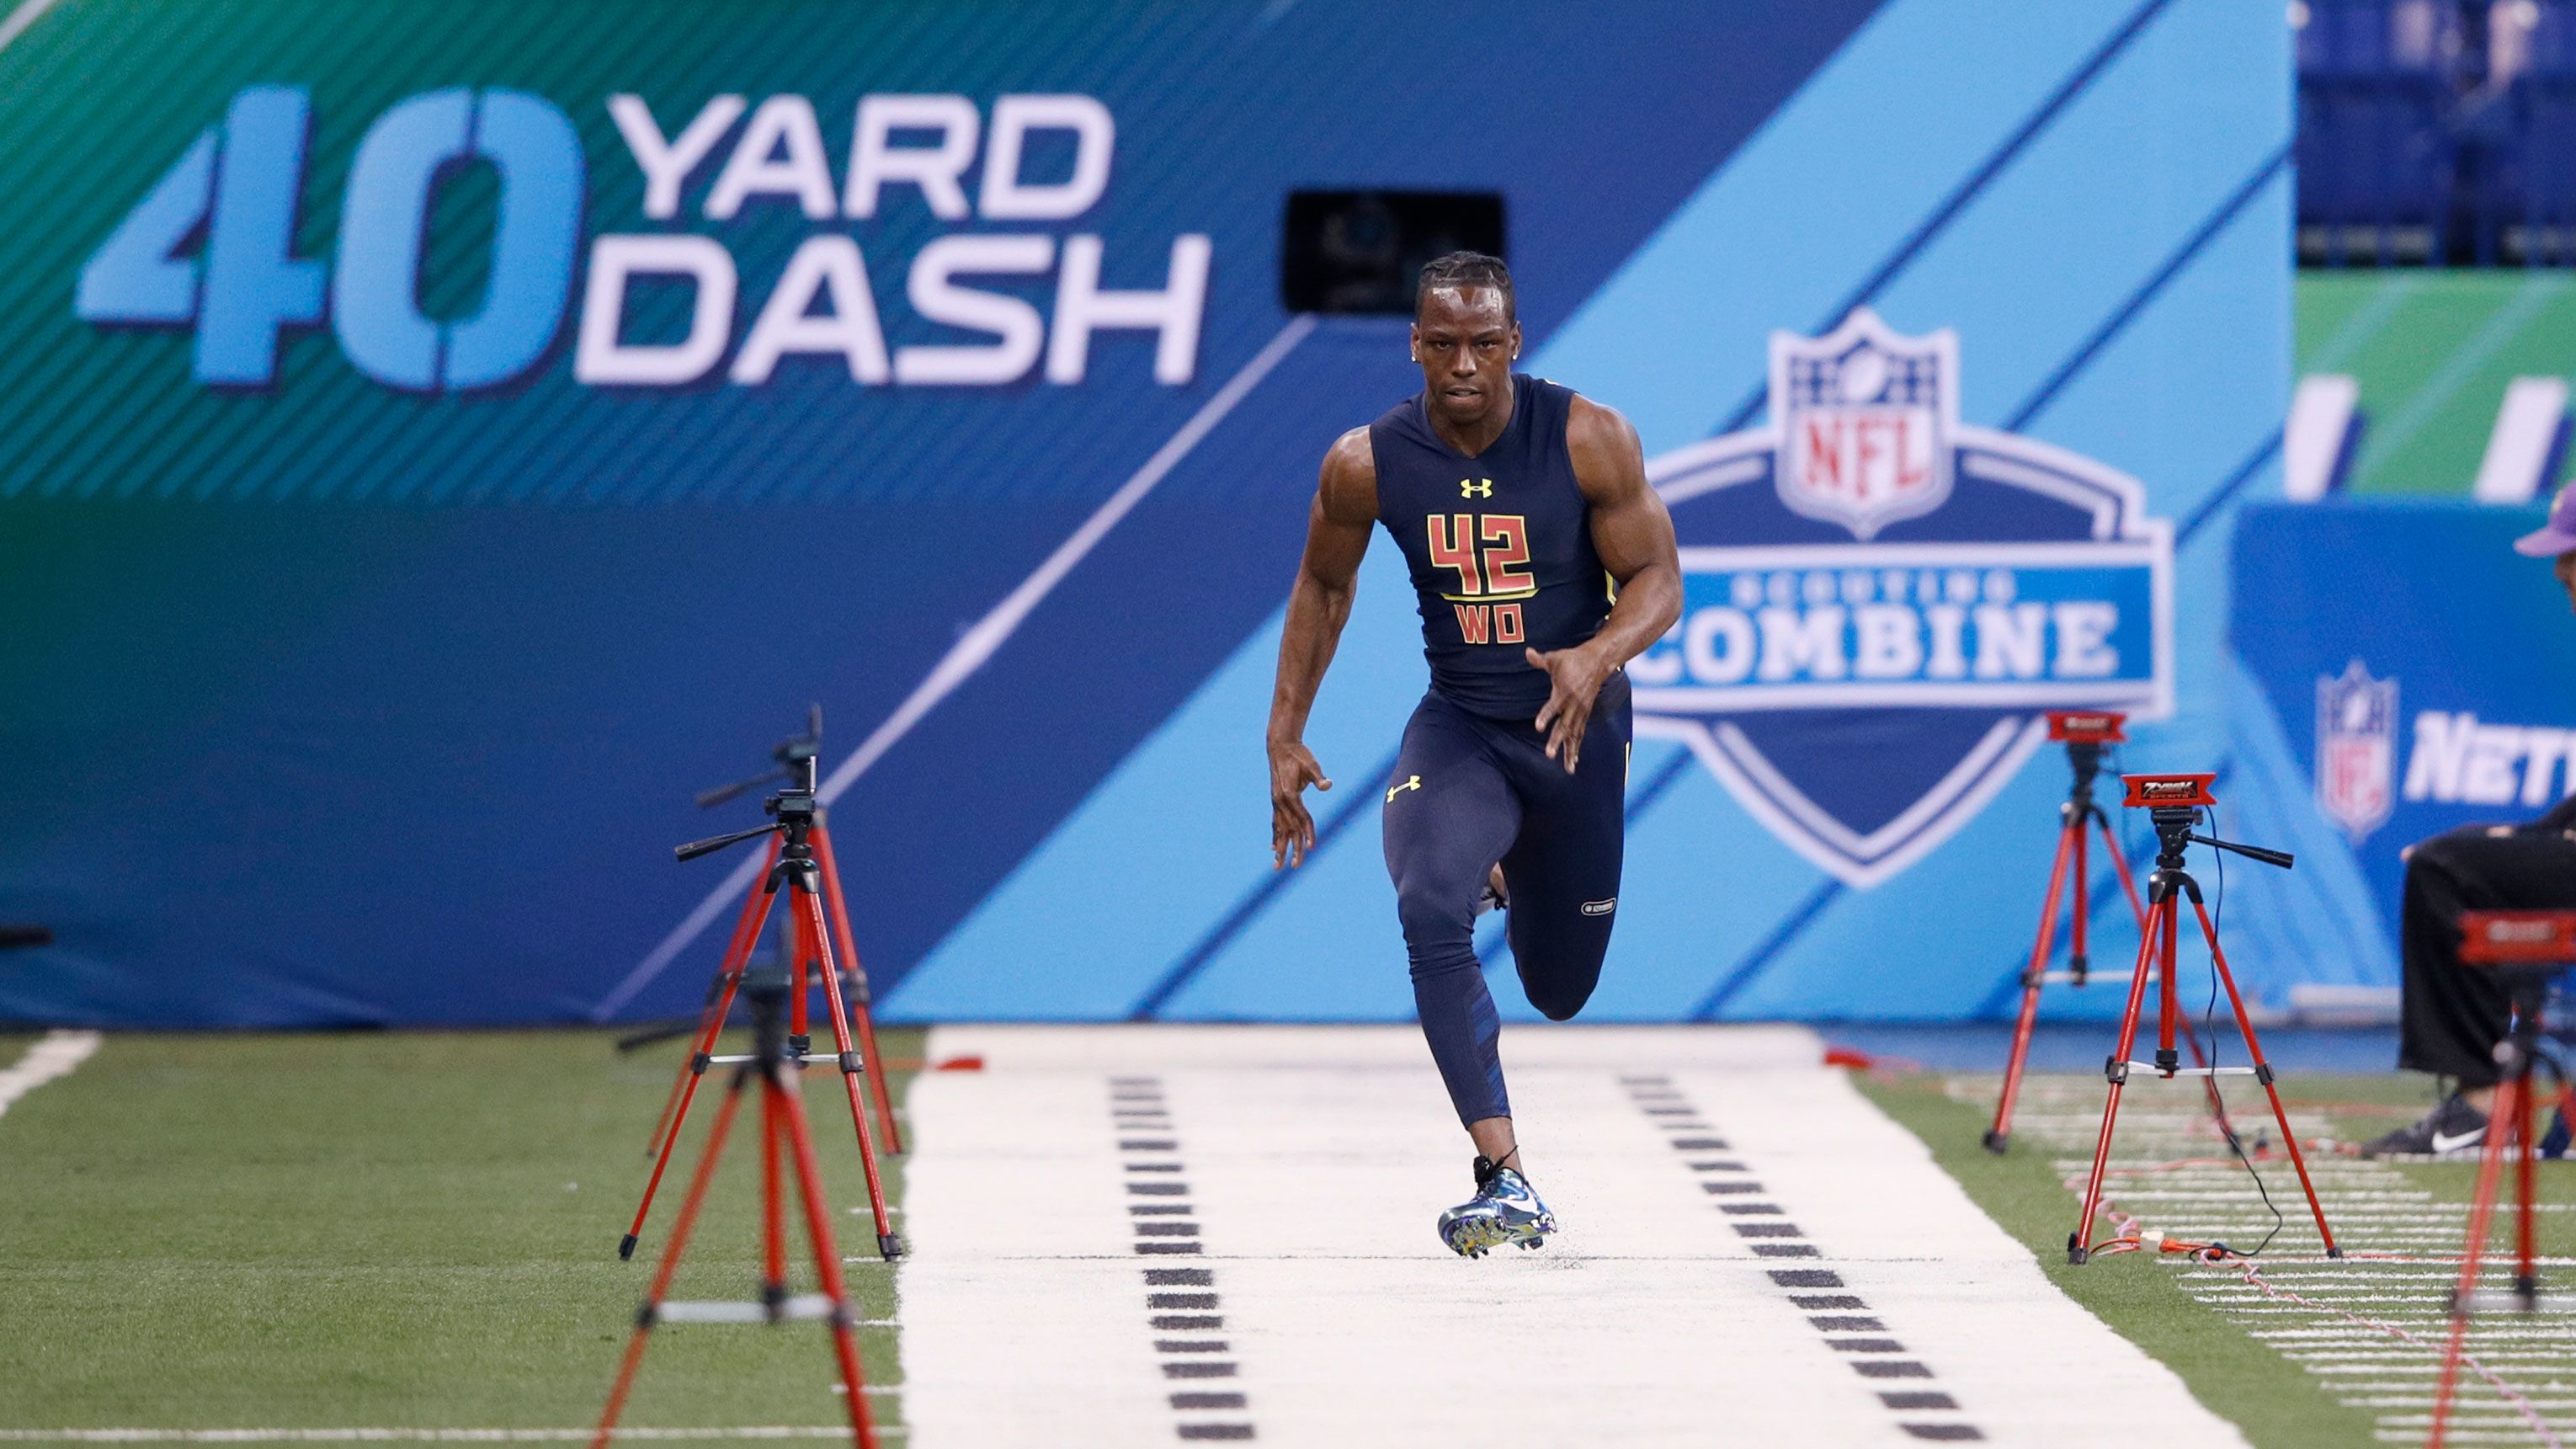 Previewing the 2023 NFL Scouting Combine